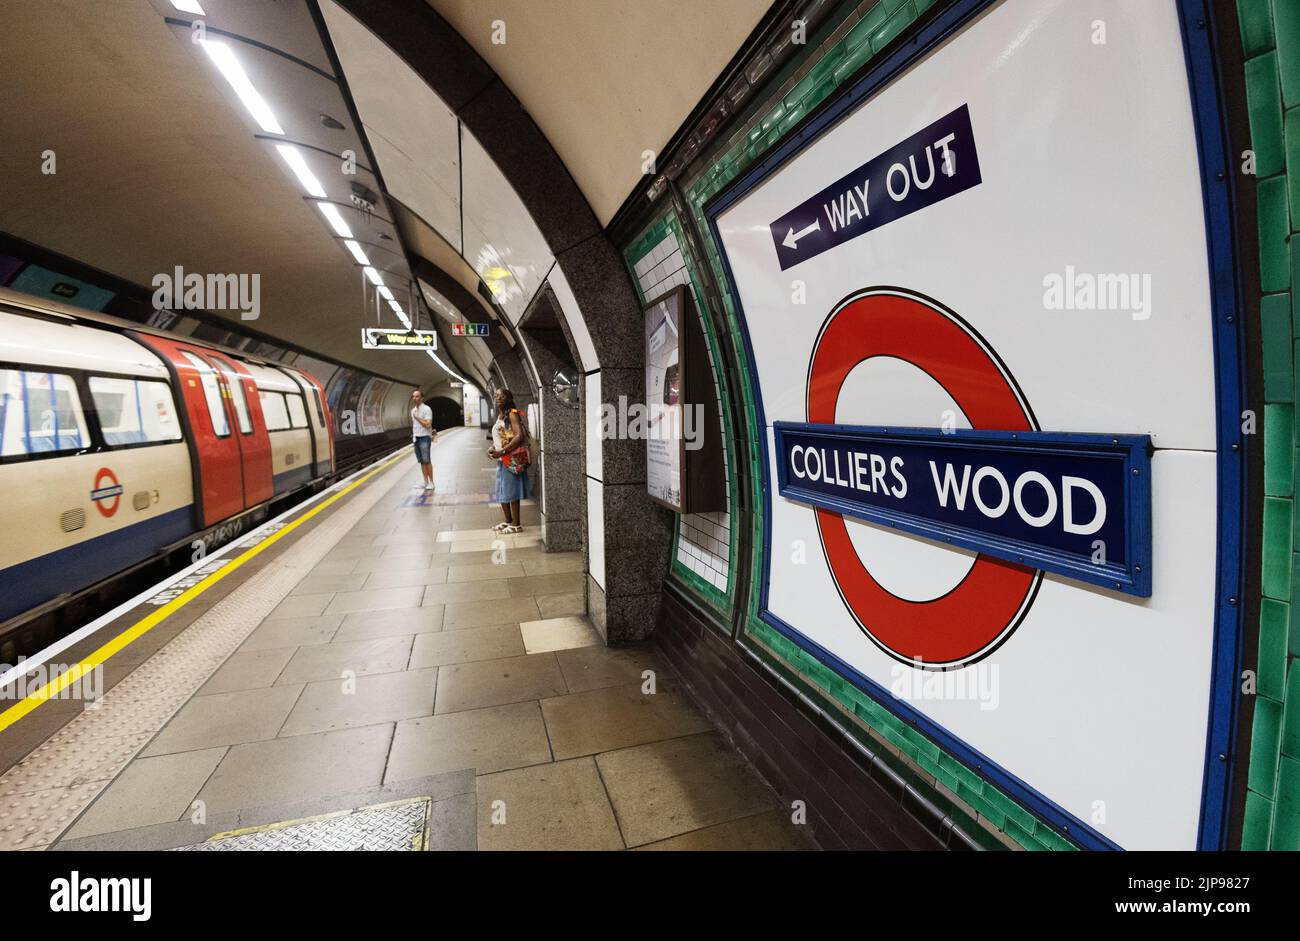 Colliers Wood underground station - sign and platform, Colliers Wood, London SW19 London UK Stock Photo